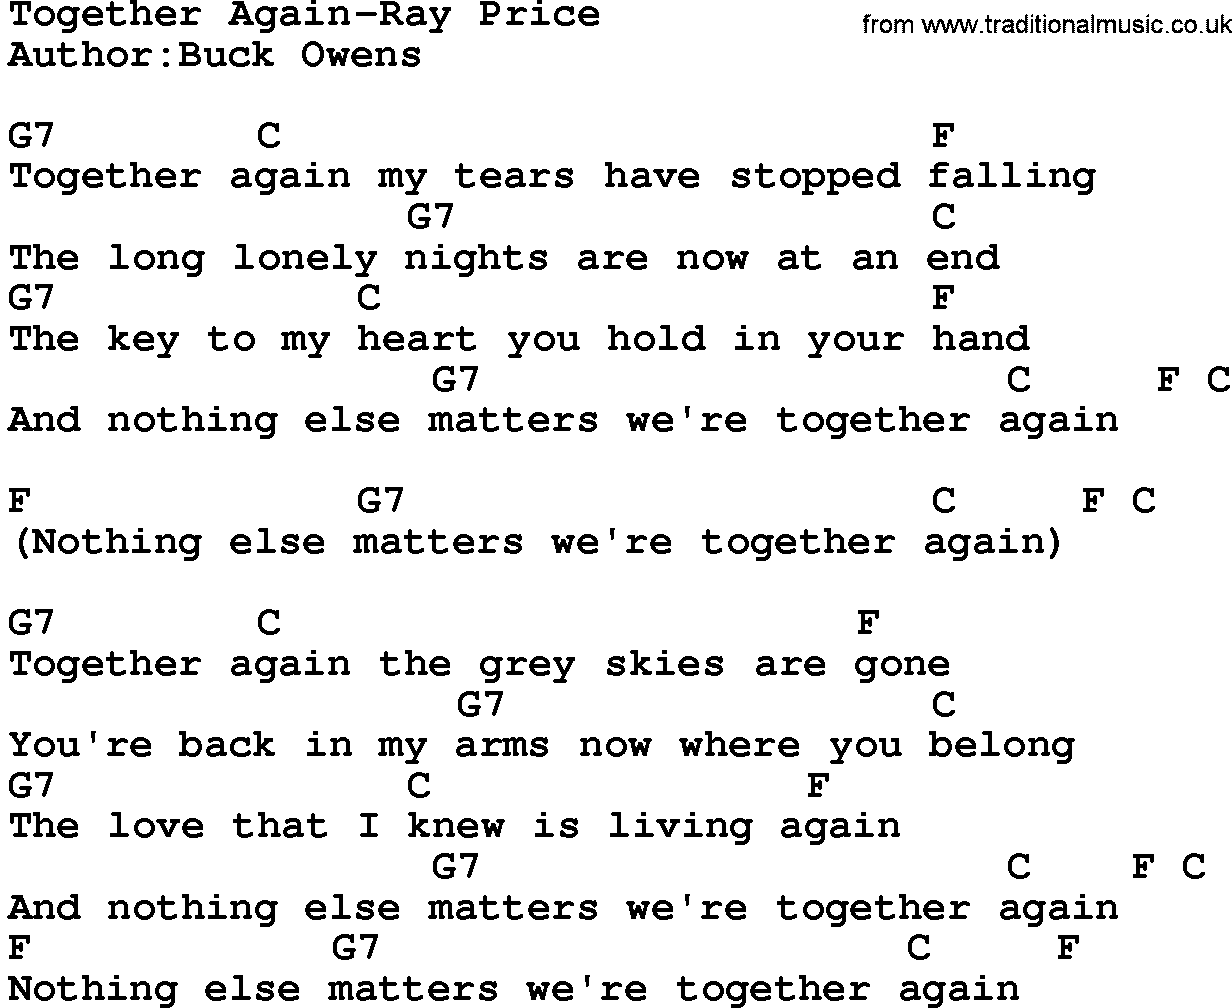 Country music song: Together Again-Ray Price lyrics and chords